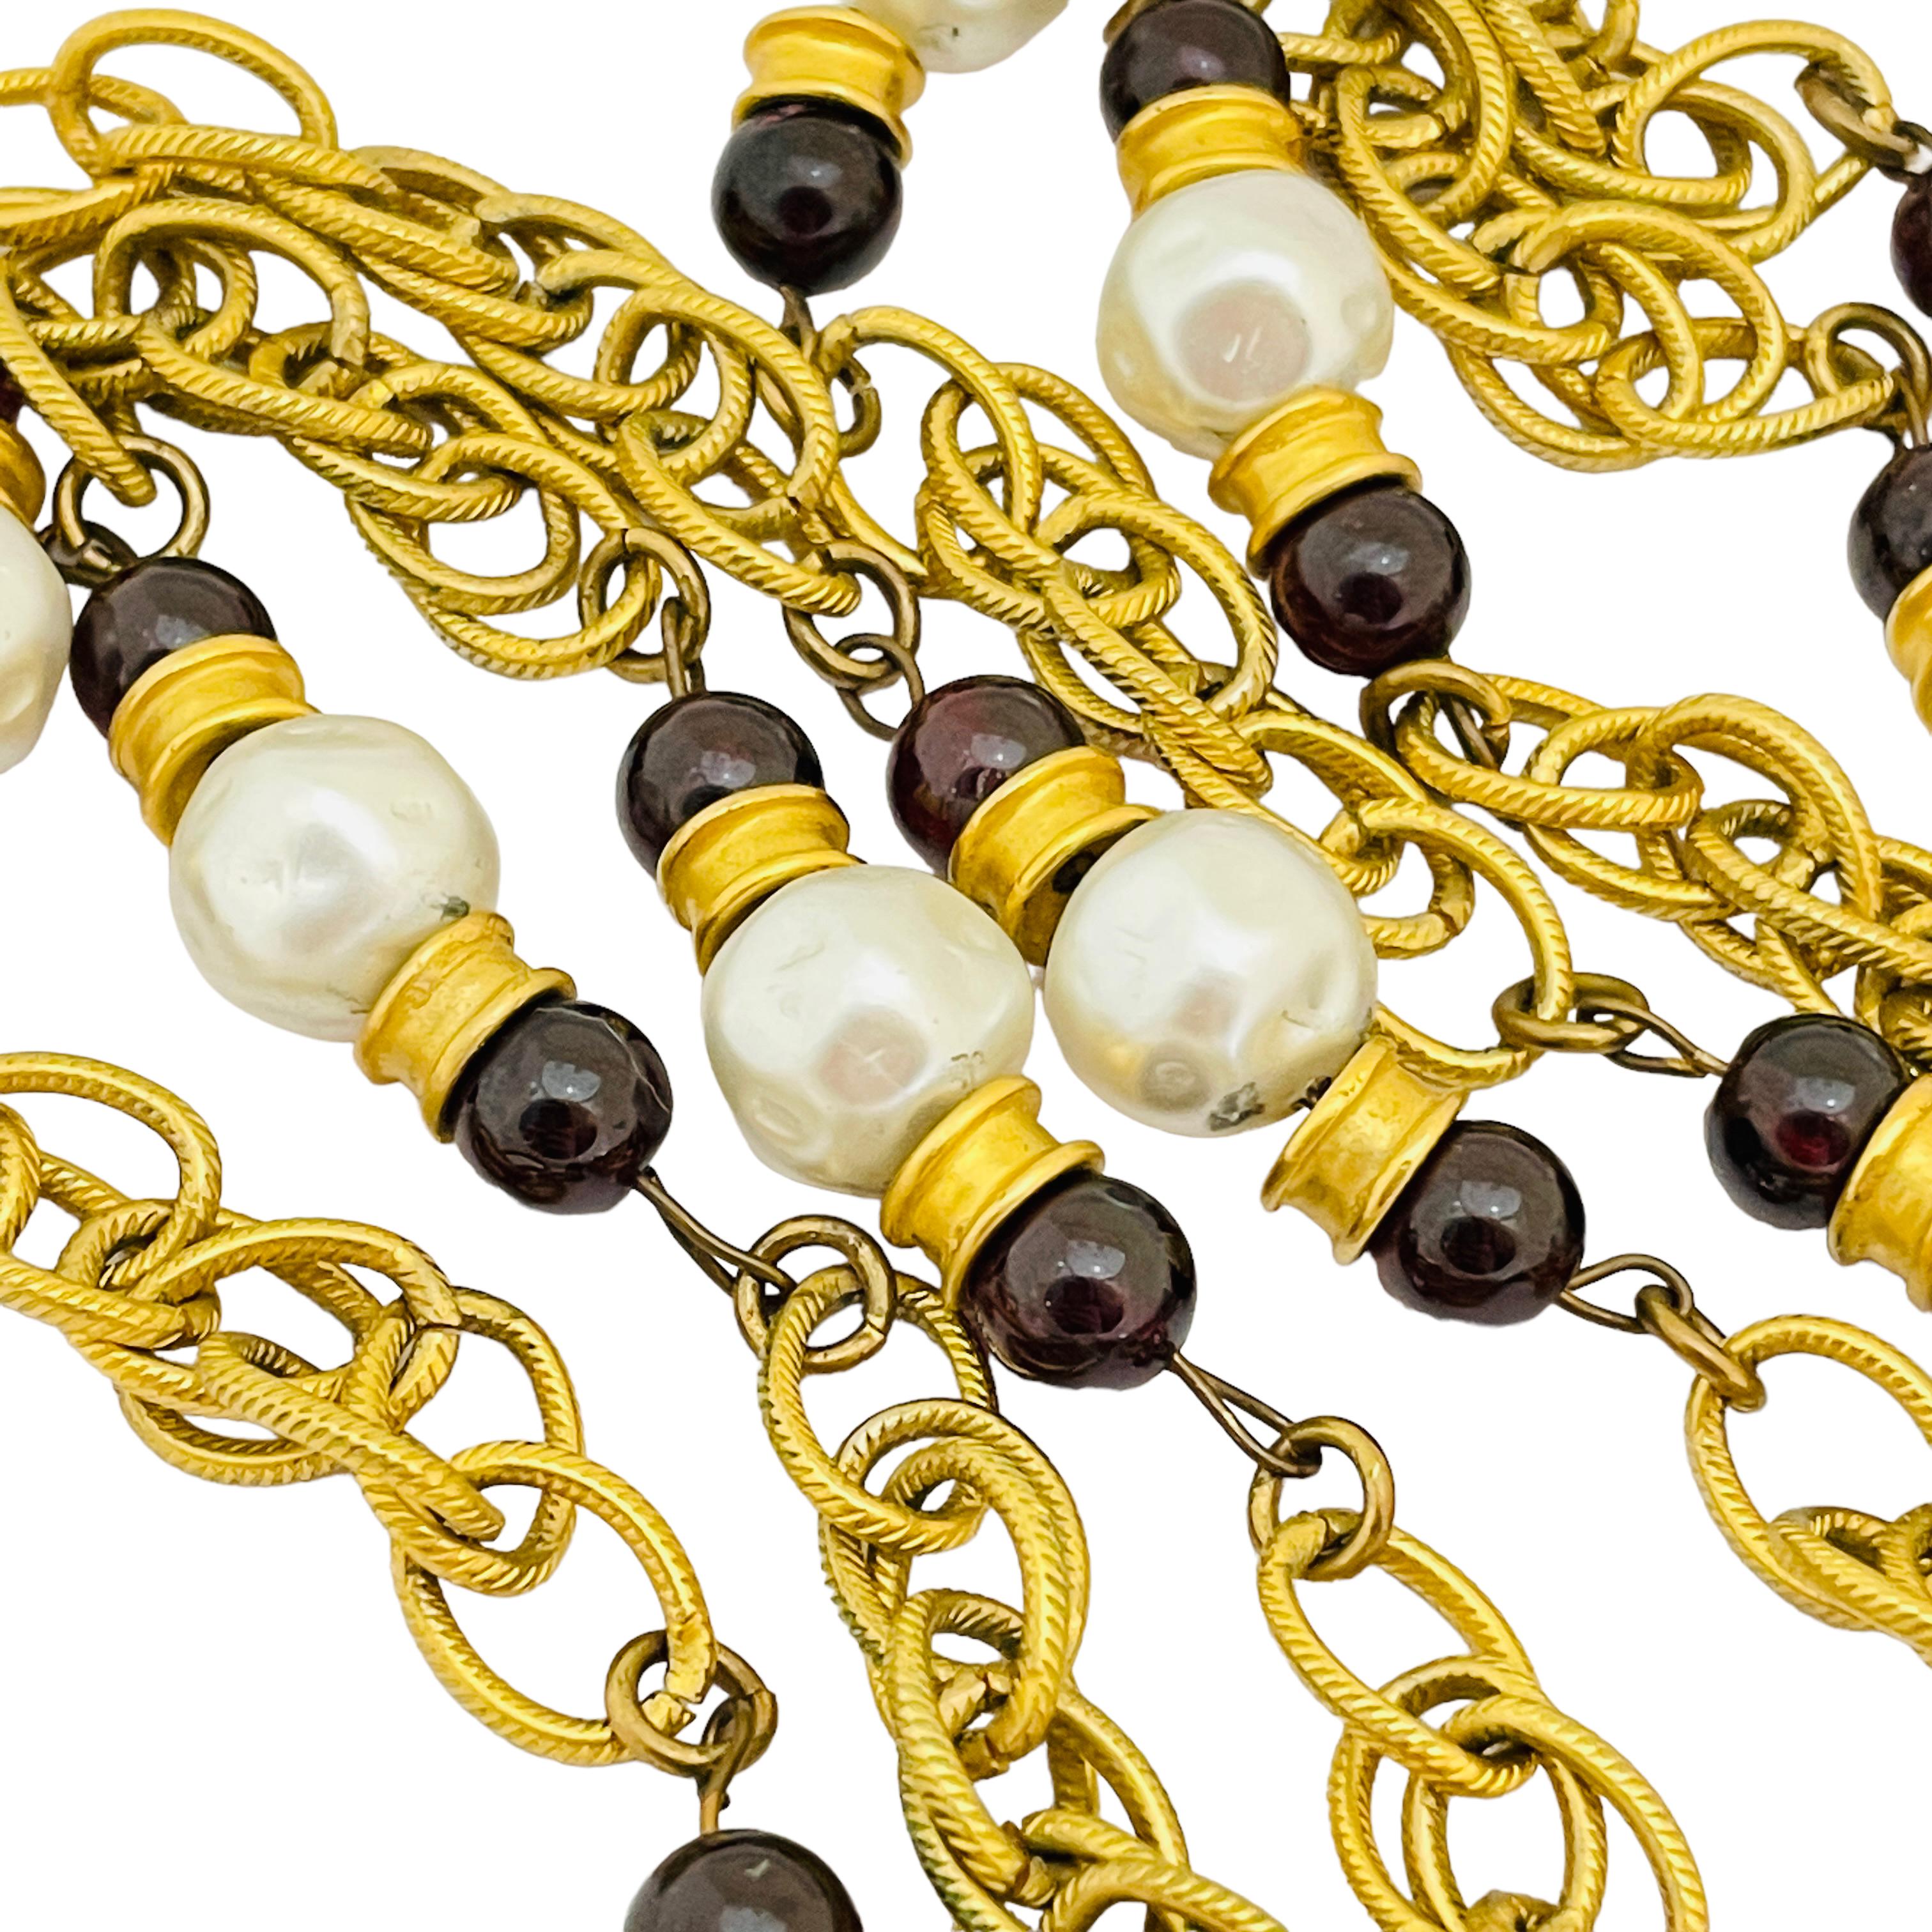 DETAILS

• unsigned 

• gold tone with glass beads

• vintage designer runway necklace  

MEASUREMENTS  

• 52